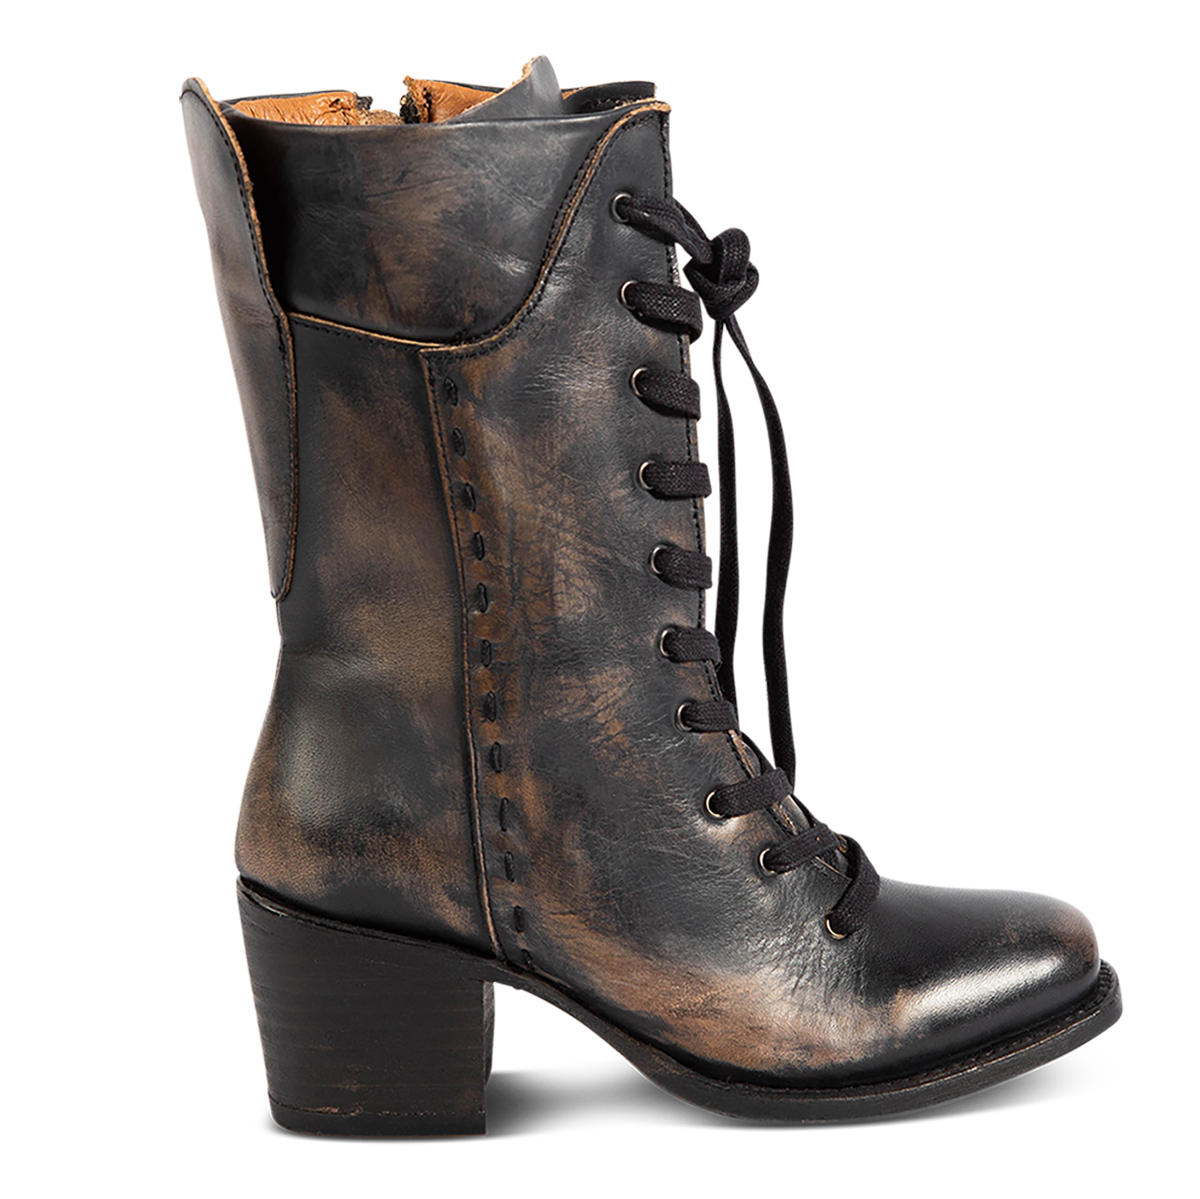 FREEBIRD women's Dart black leather boot with front tie lacing, whip stitch siding and stacked heel